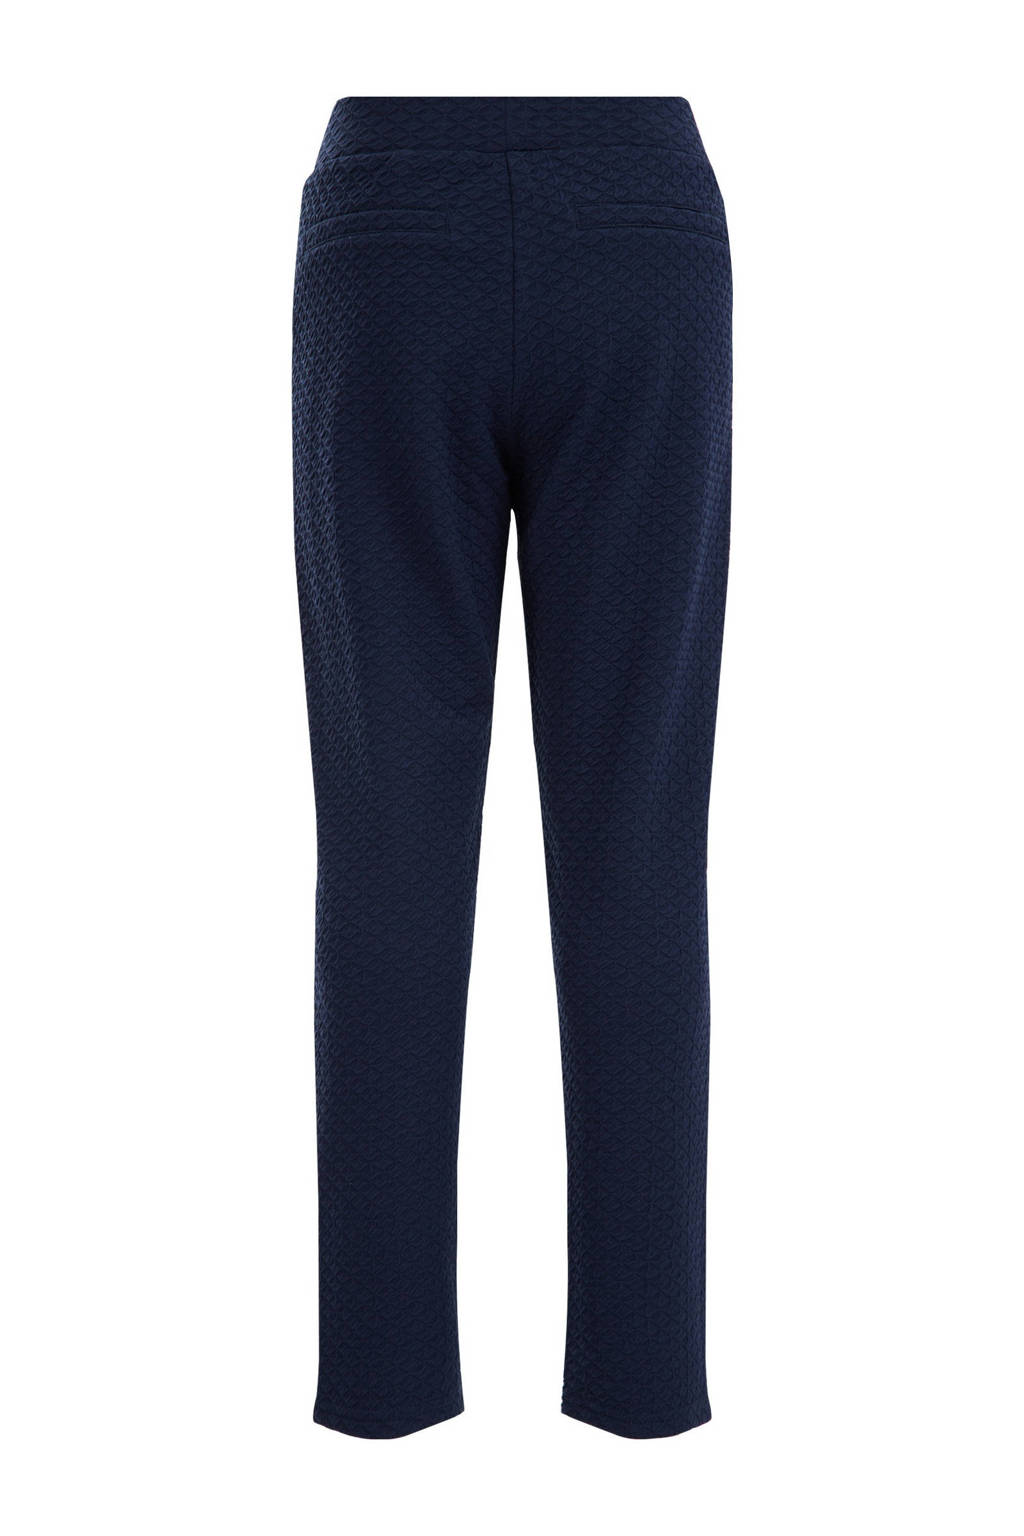 tapered fit broek donkerblauw